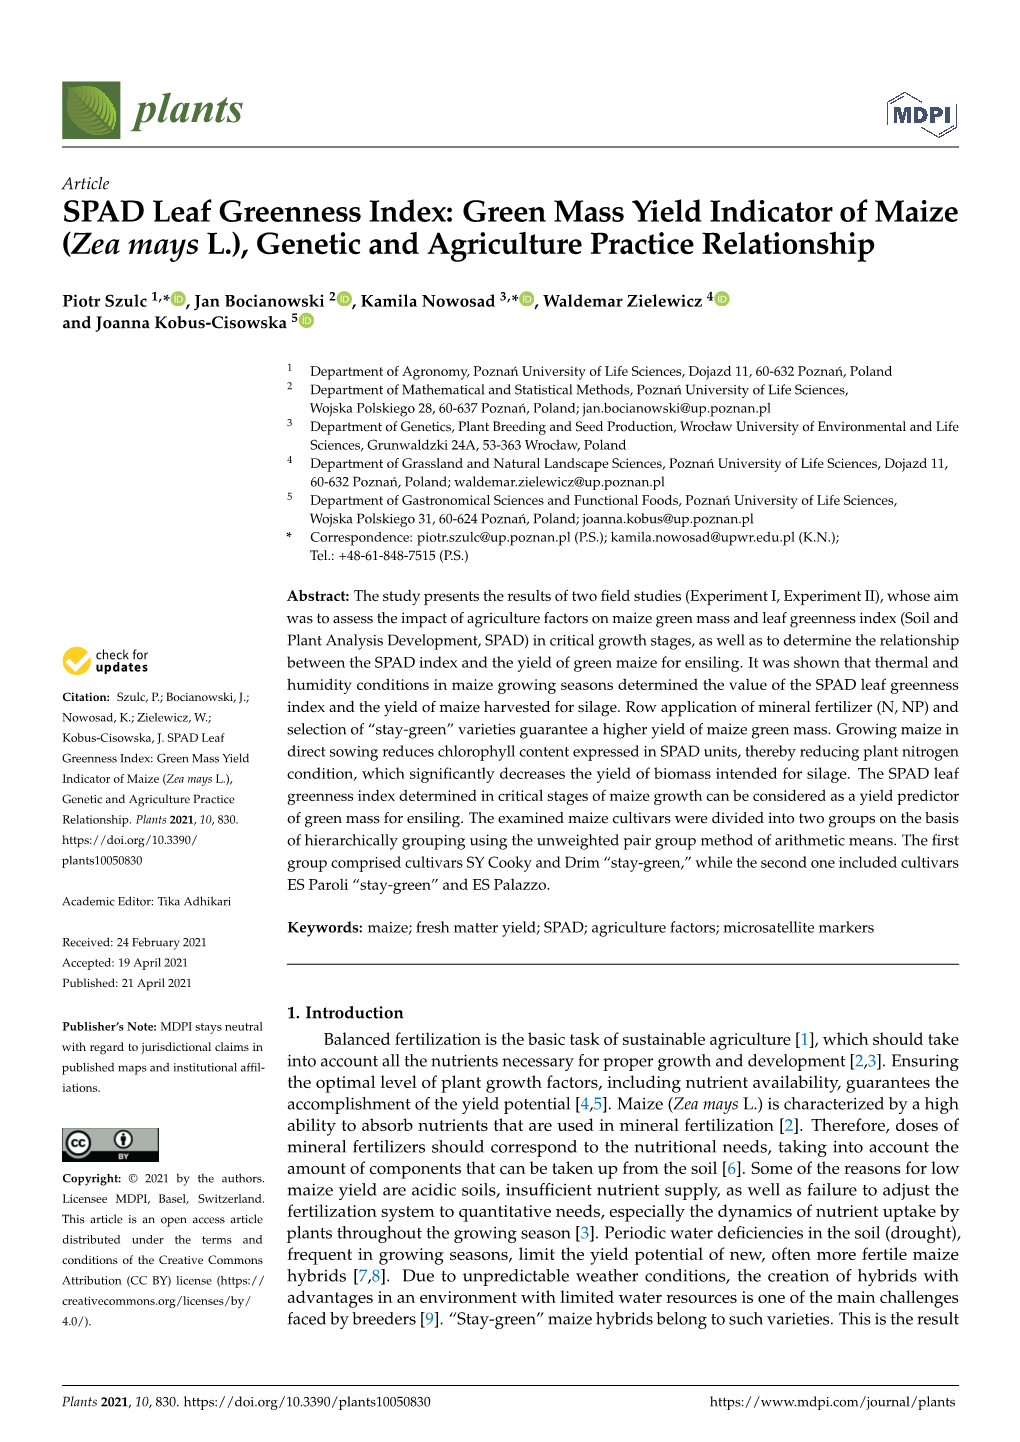 Green Mass Yield Indicator of Maize (Zea Mays L.), Genetic and Agriculture Practice Relationship